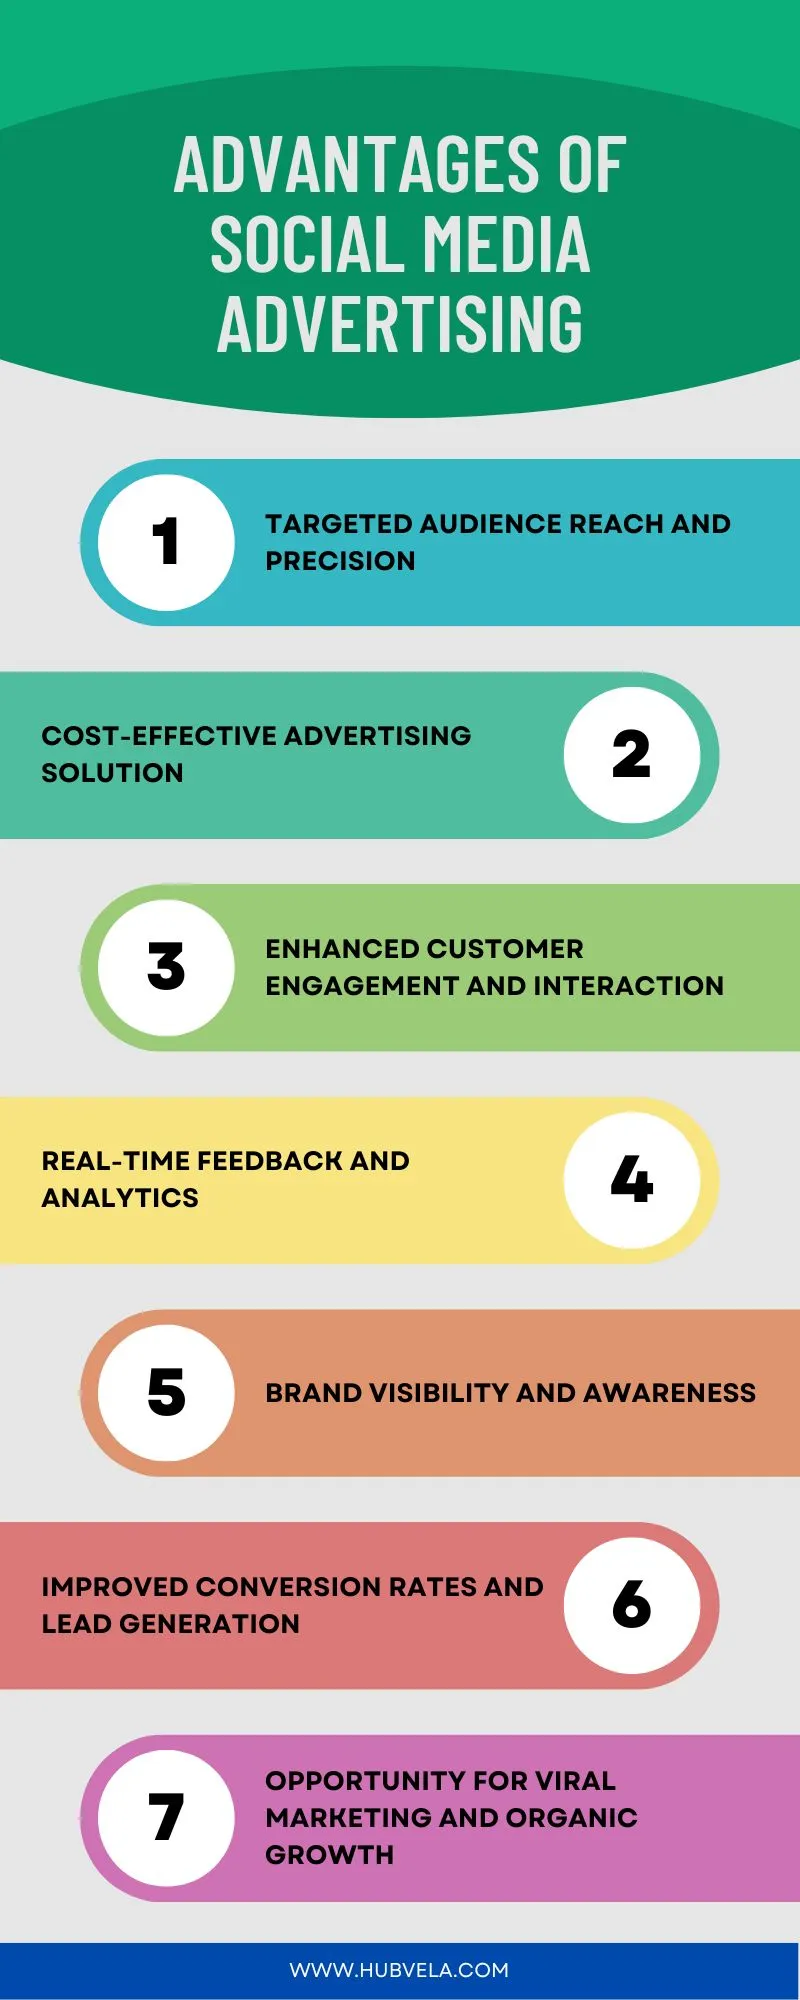 Advantages of Social Media Advertising infographic